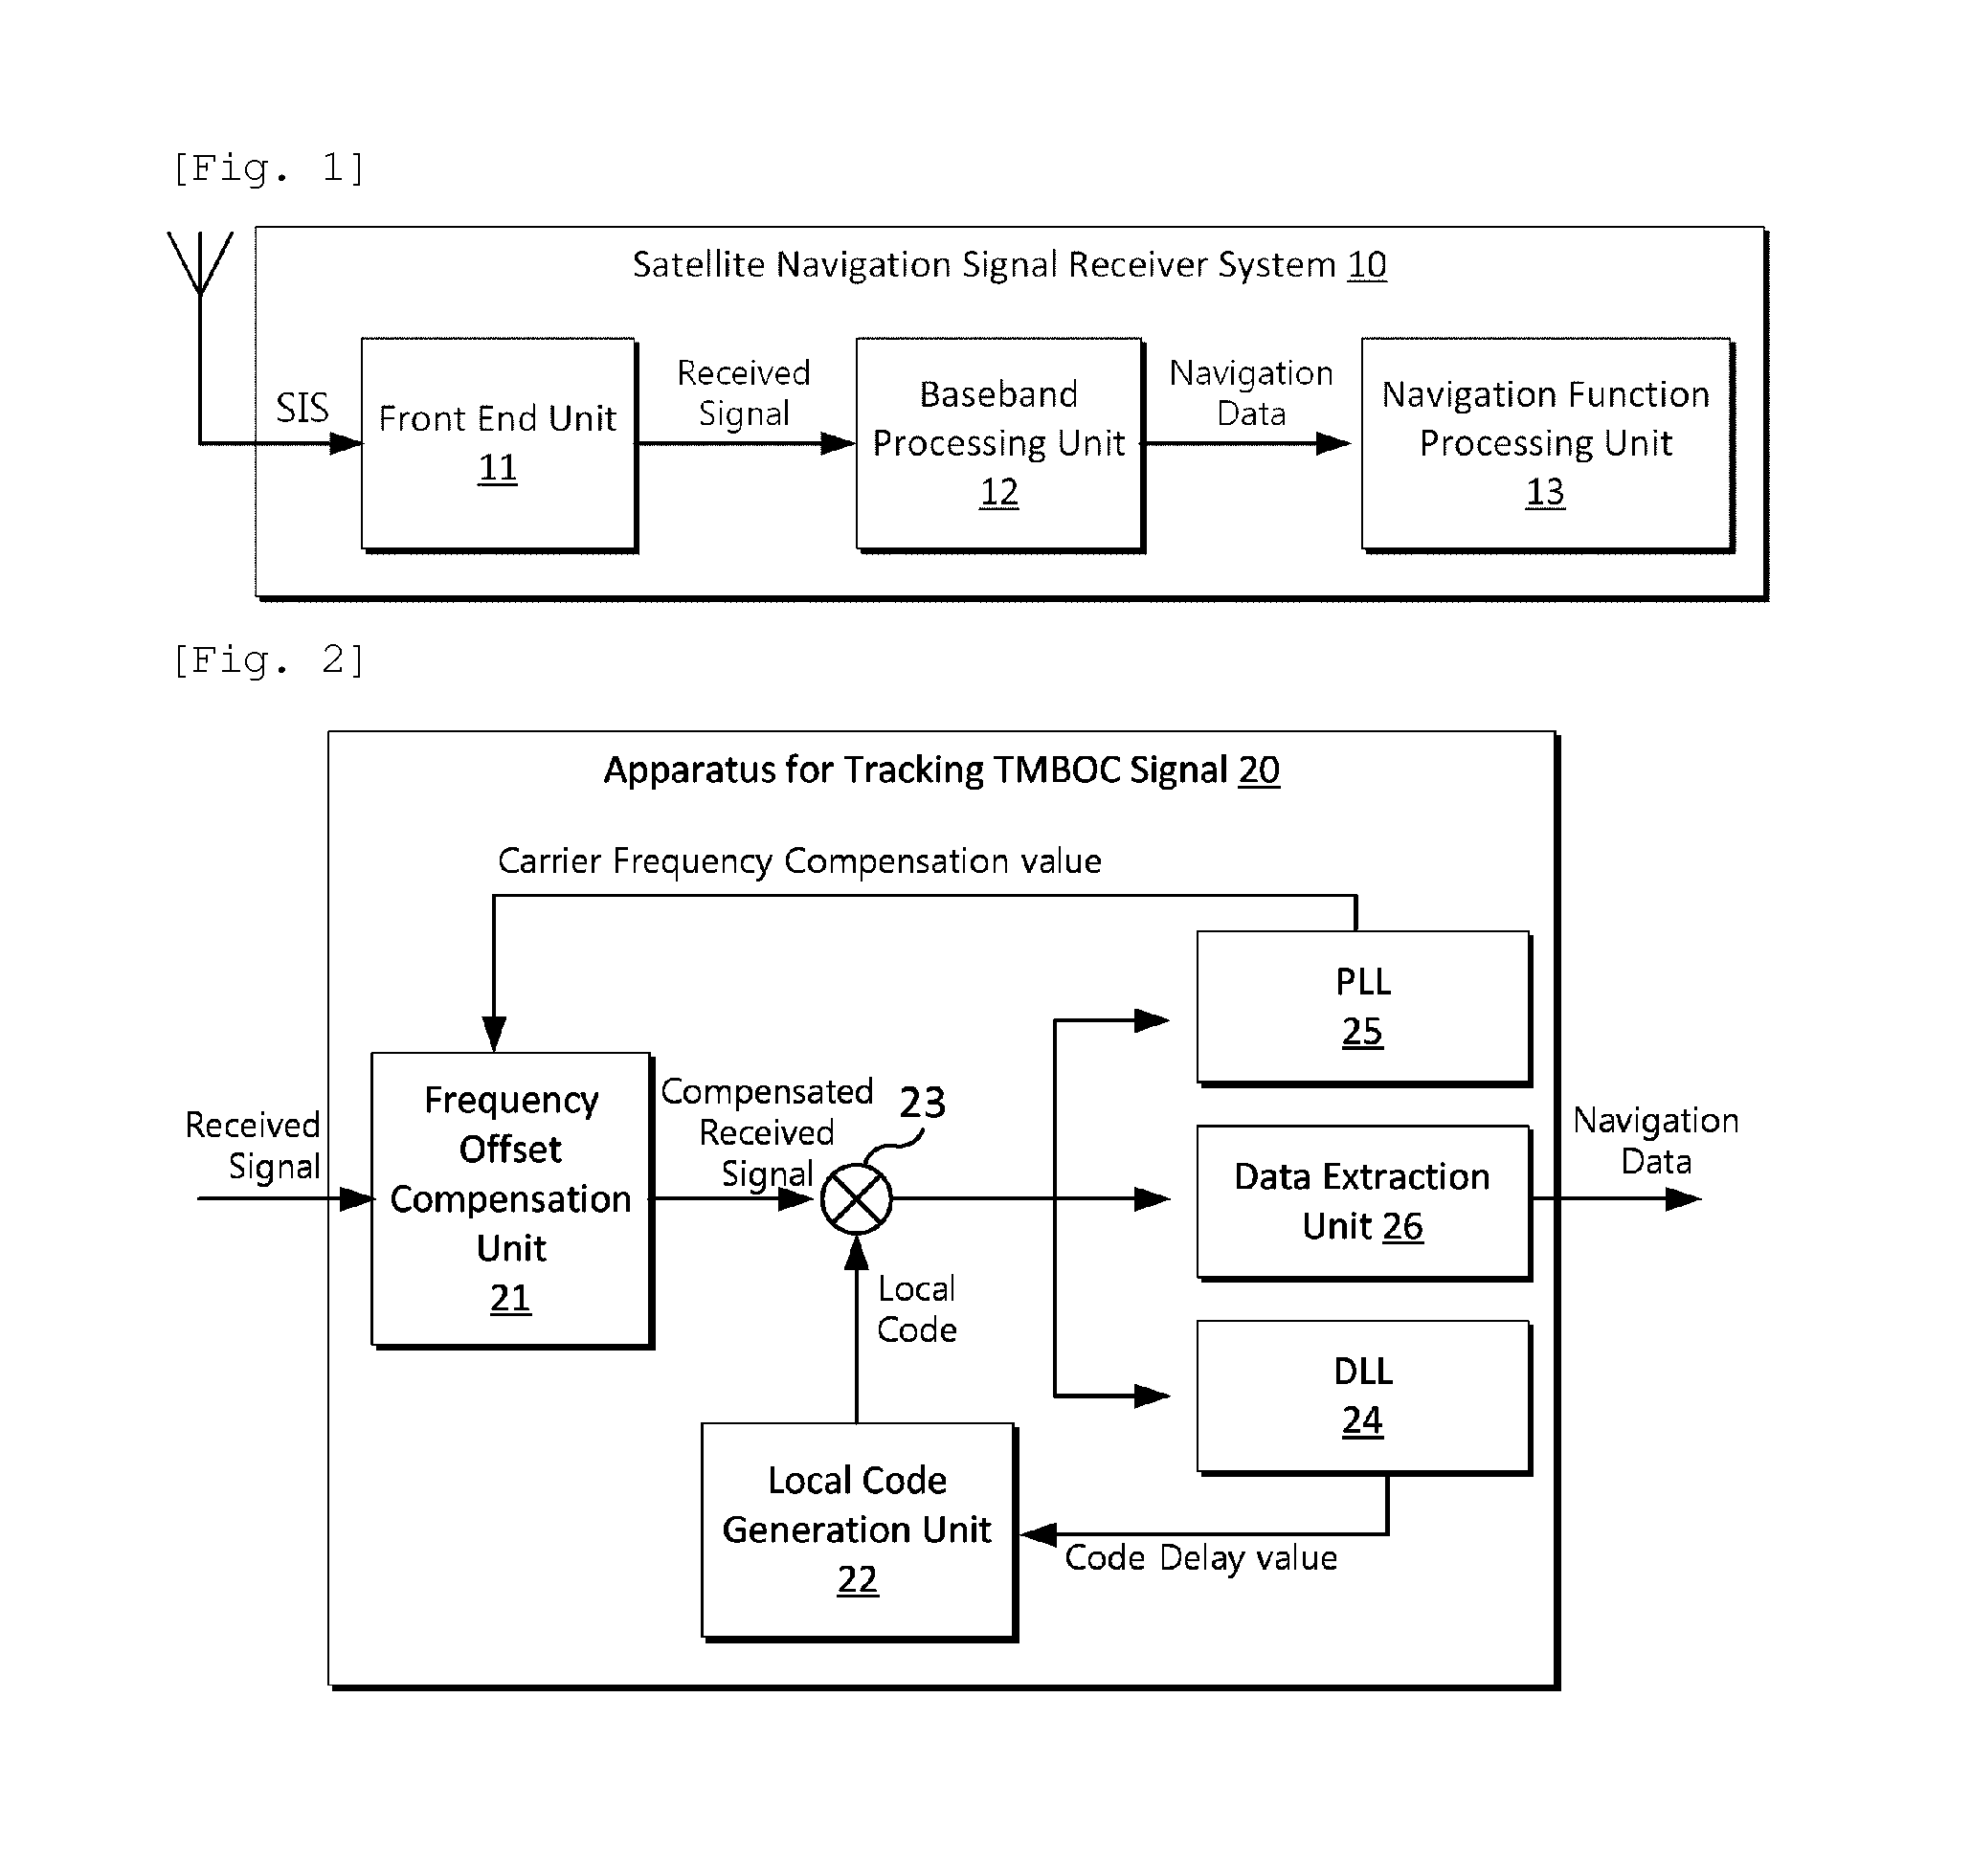 Method for generating unambiguous correlation function for tmboc(6,1,4/33) signal based on equally split partial correlation functions, apparatus for tracking tmboc signals and satellite navigation signal receiver system